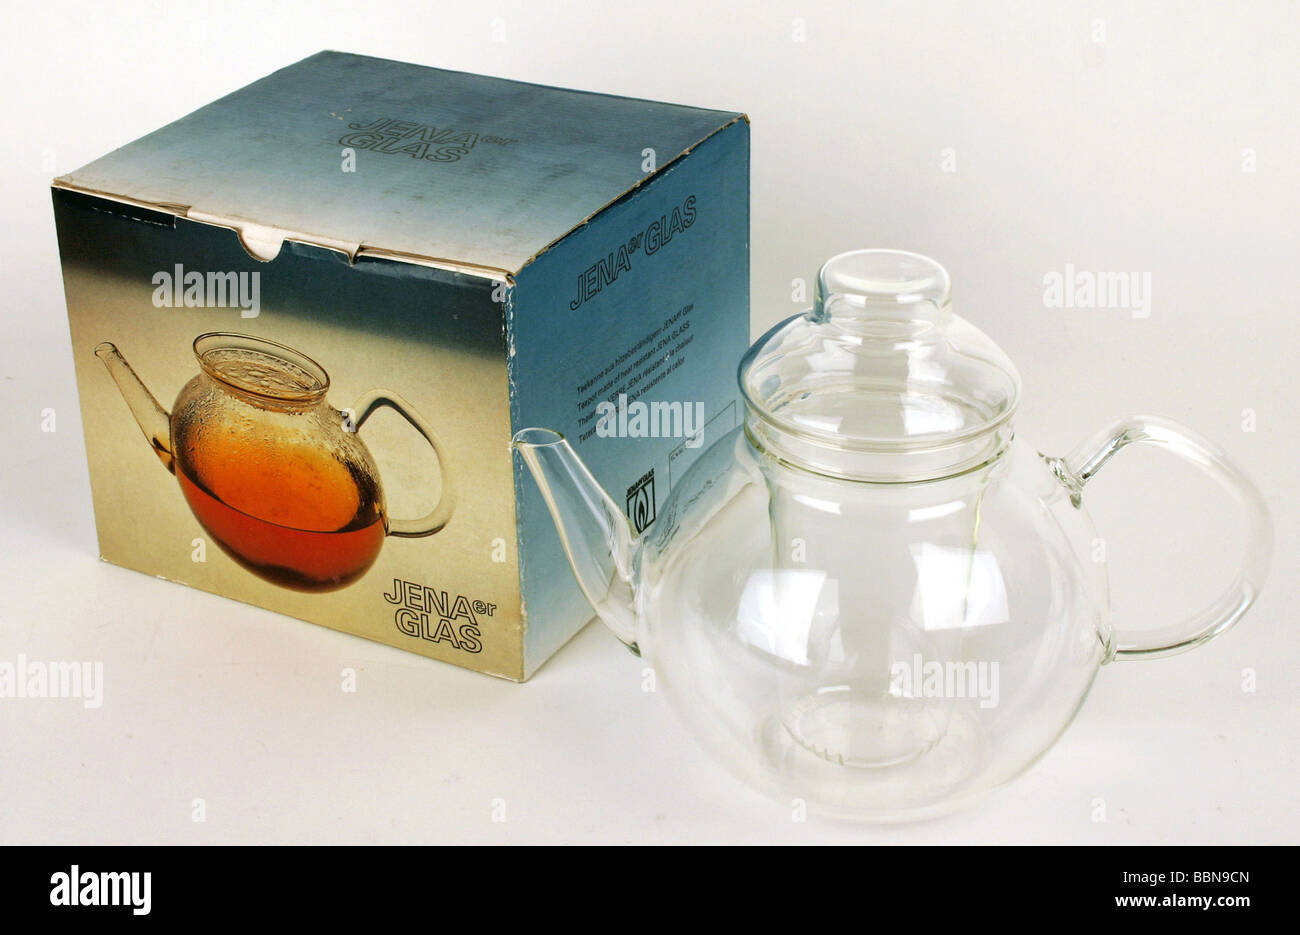 Teapot Jenaer Glass High Resolution Stock Photography and Images - Alamy